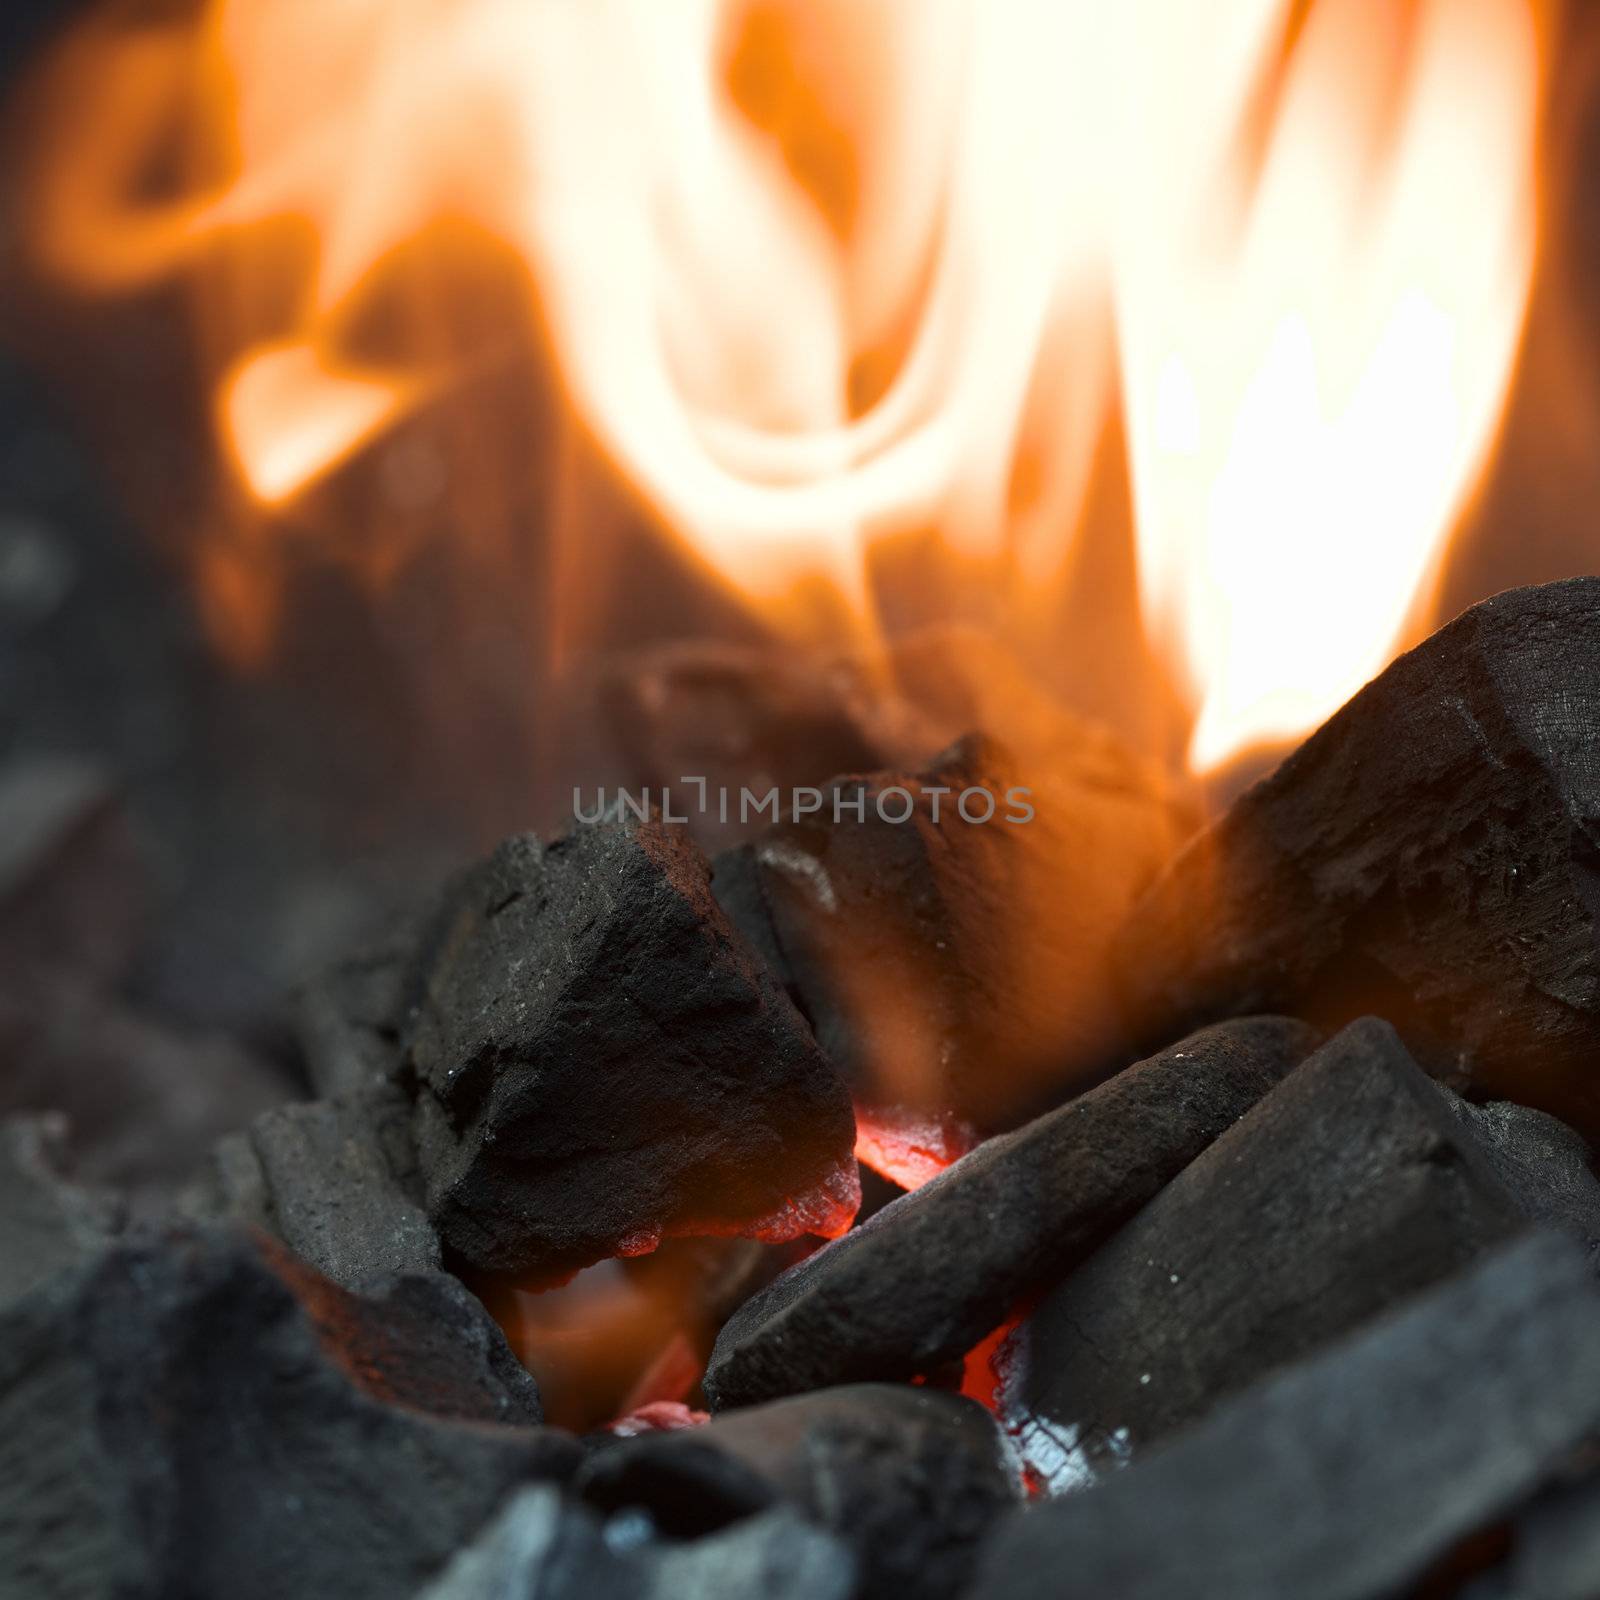 Burning charcoal with orange-colored flame and glow (Selective Focus, Focus on the front of the charcoal piece on the left side of the flame)